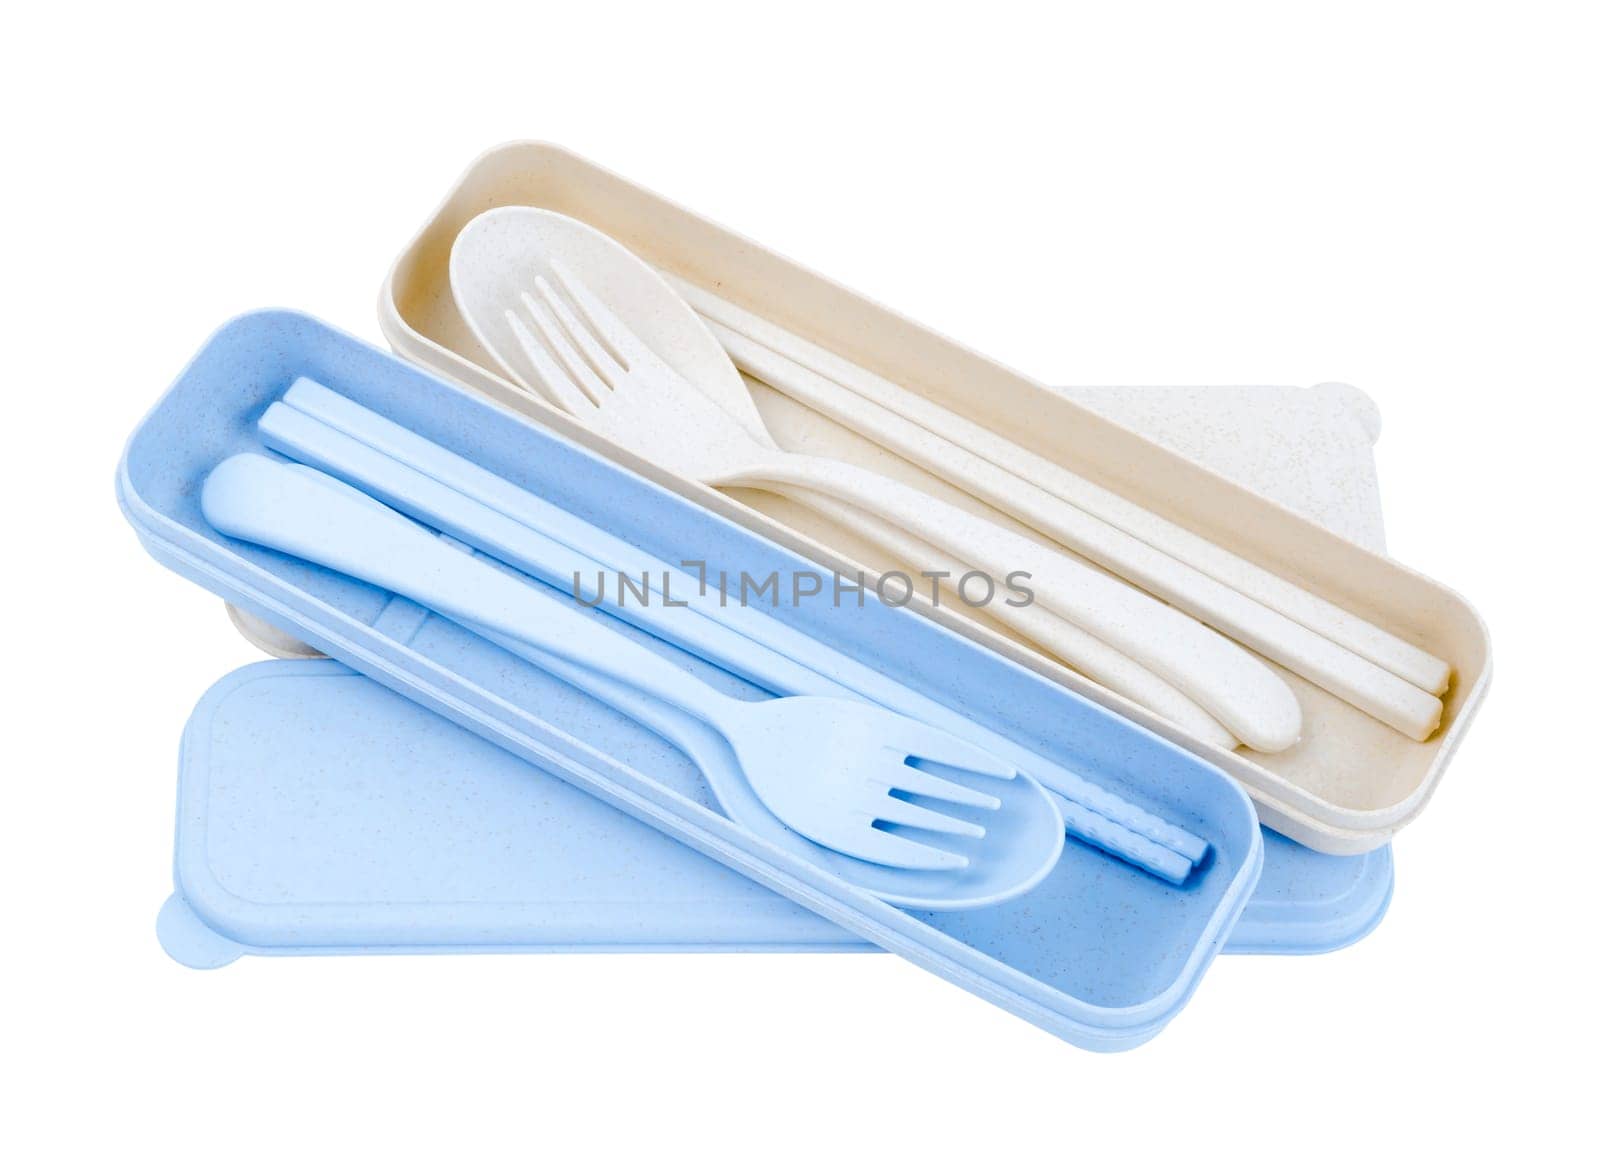 Plastic spoons, forks and chopsticks set isolated on white background. Saved clipping path.